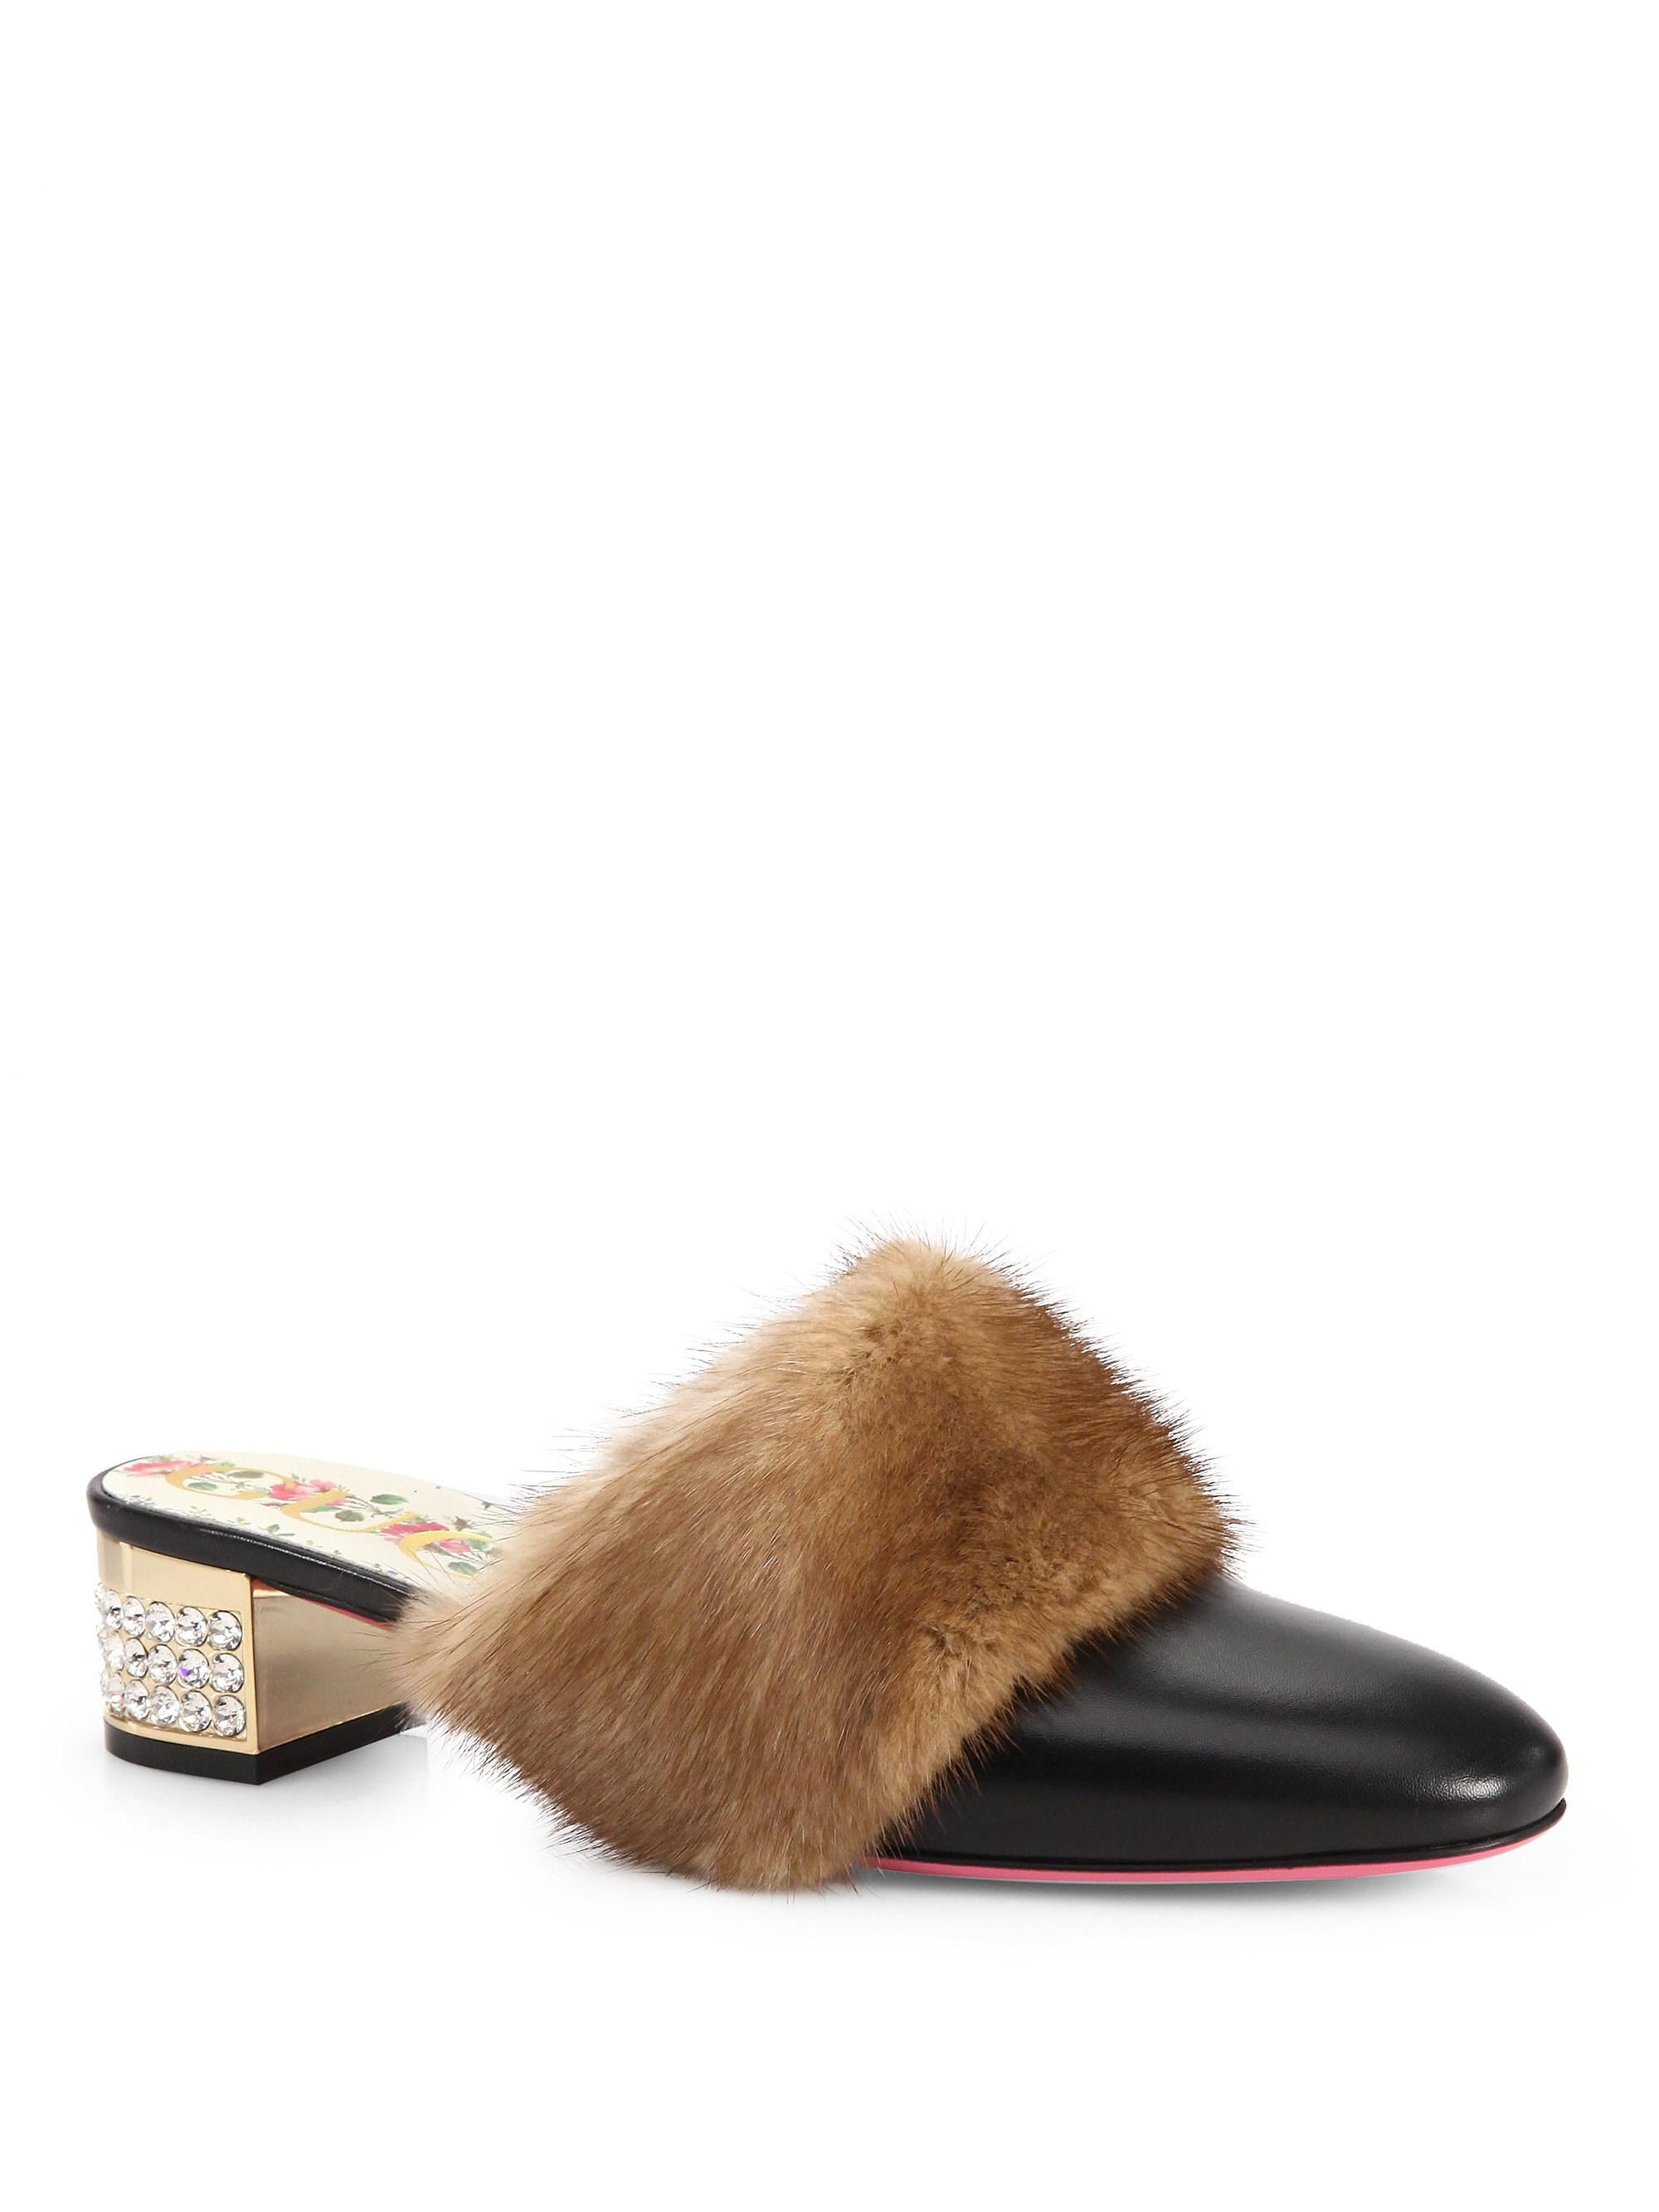 Gucci Leather Slide With Mink Fur in Black - Lyst